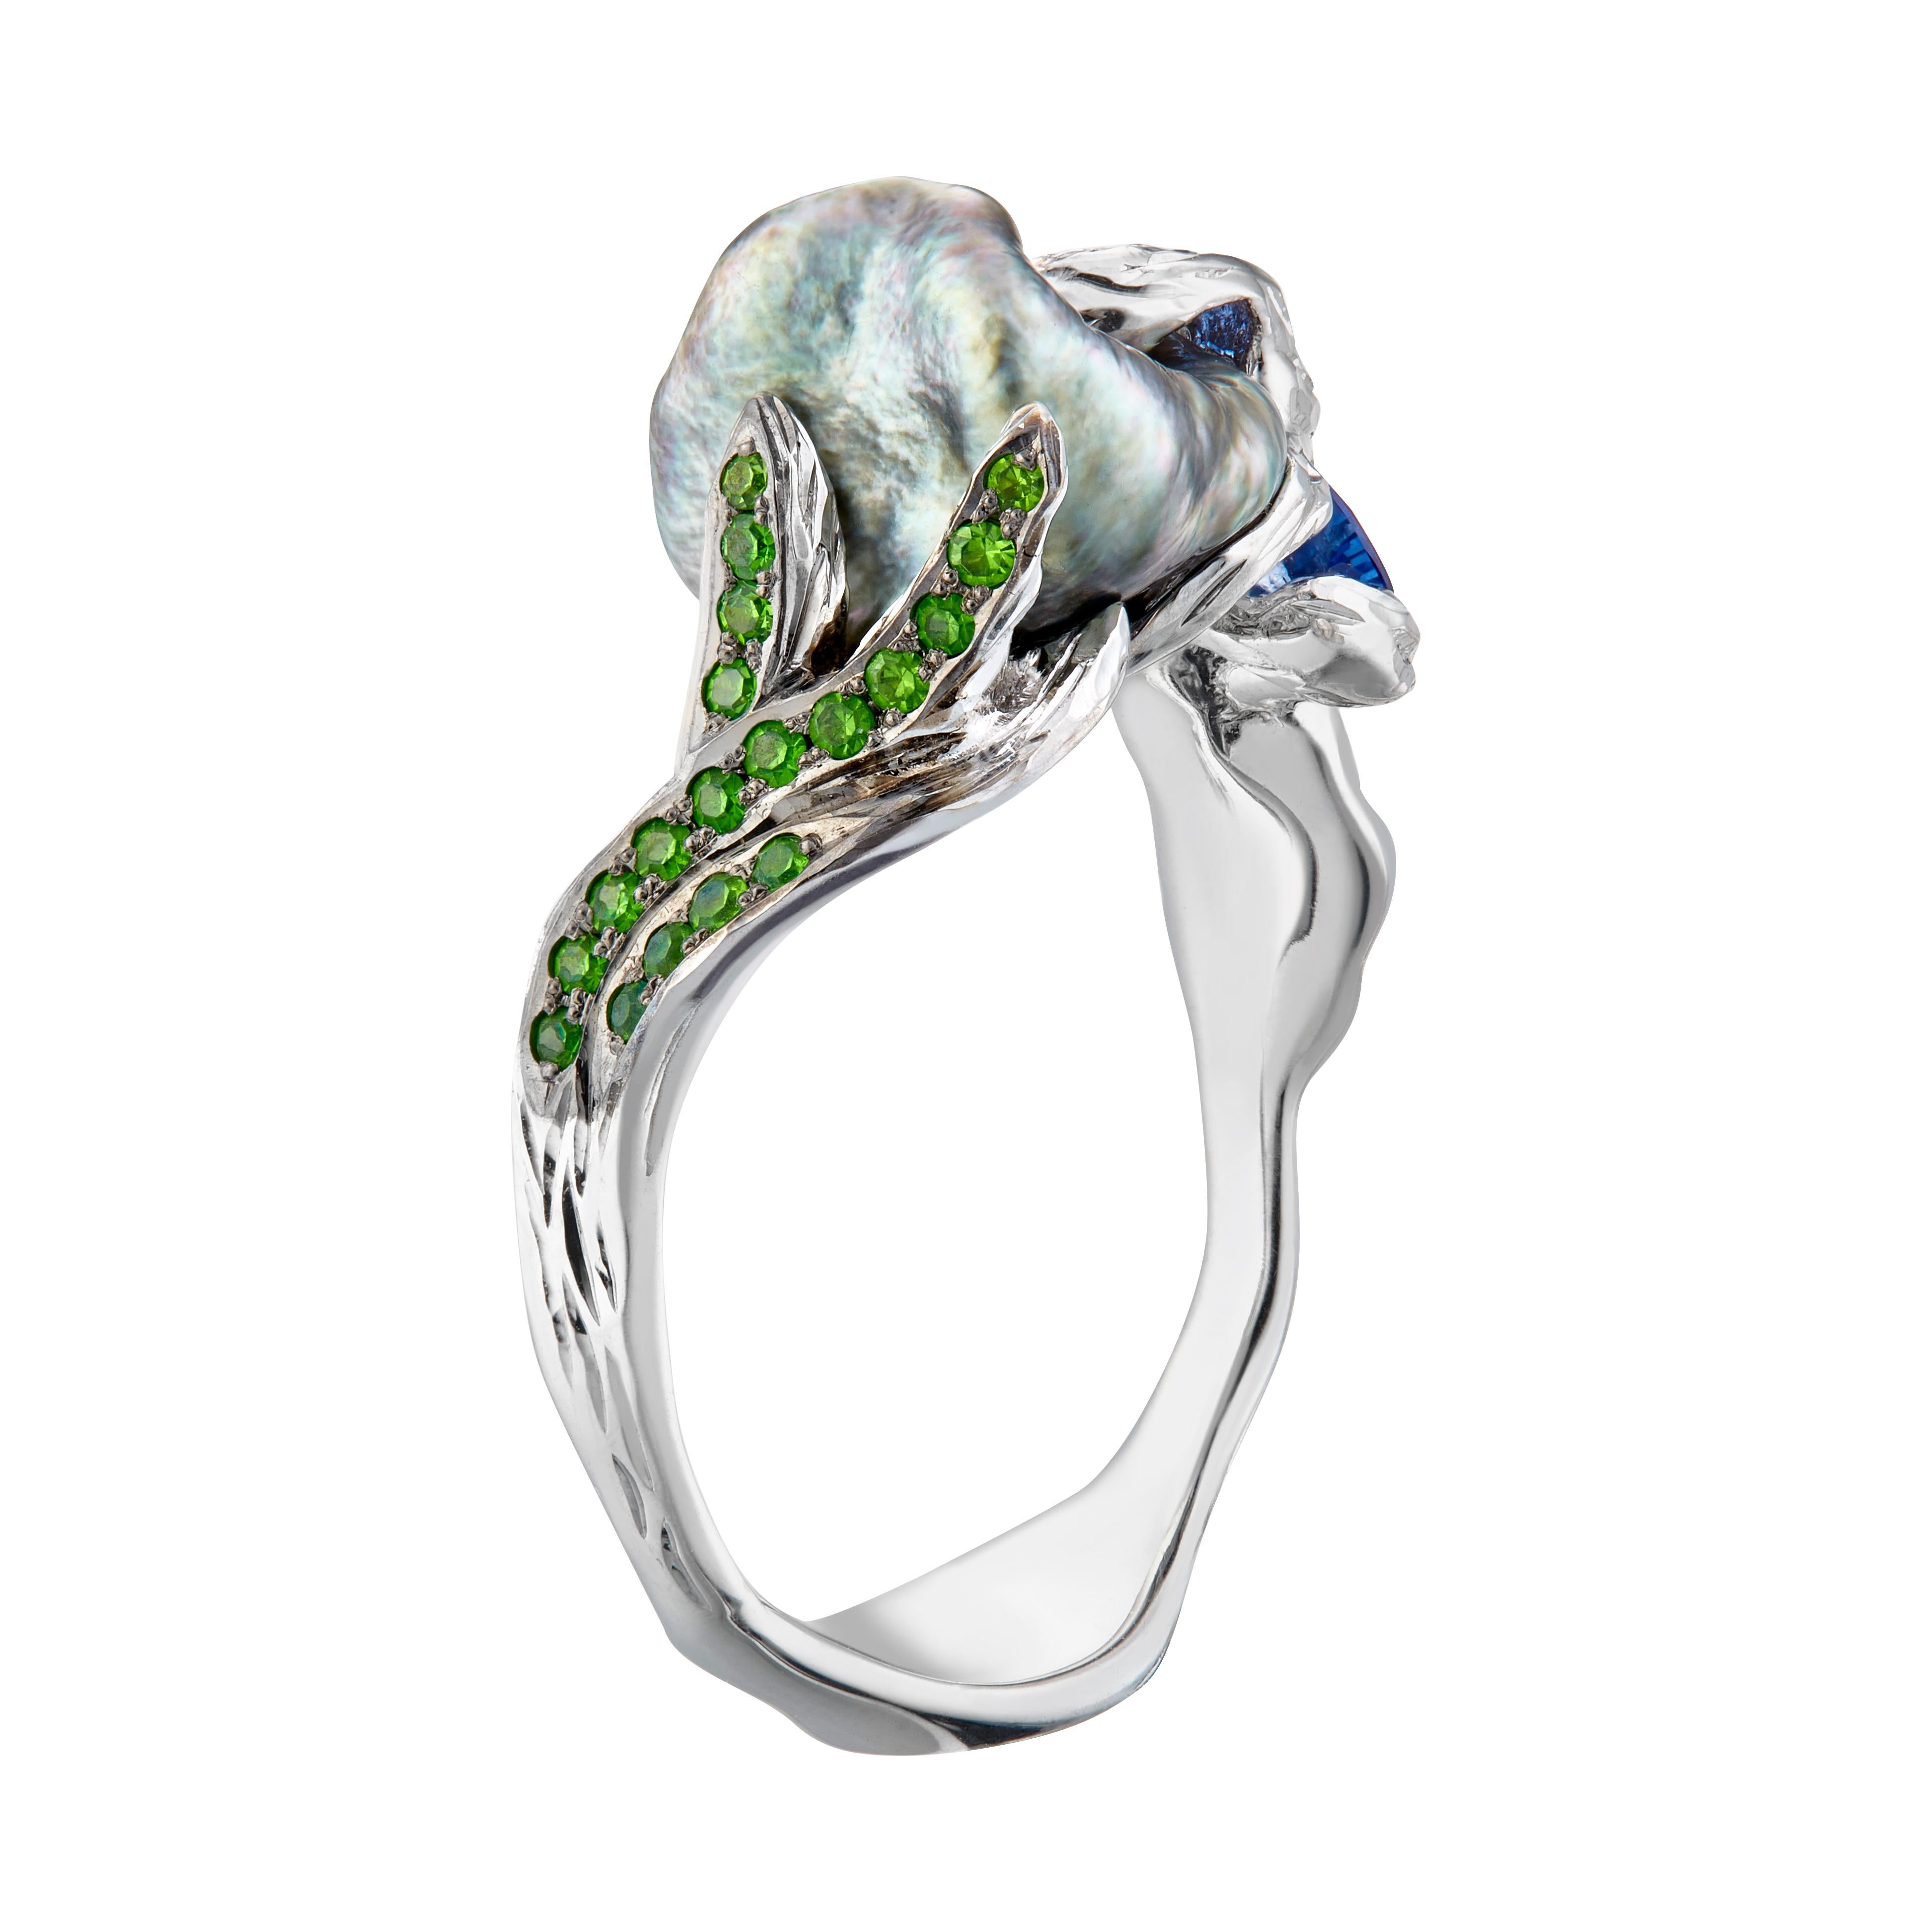 Inspired by impressionism and starry night painting by Van Gogh, MOISEIKIN created a lively  ring with unique form of Tahiti keshi pearl and night sky blue sapphire. Swirling sky is well expressed on the ring using skilful carving technique and